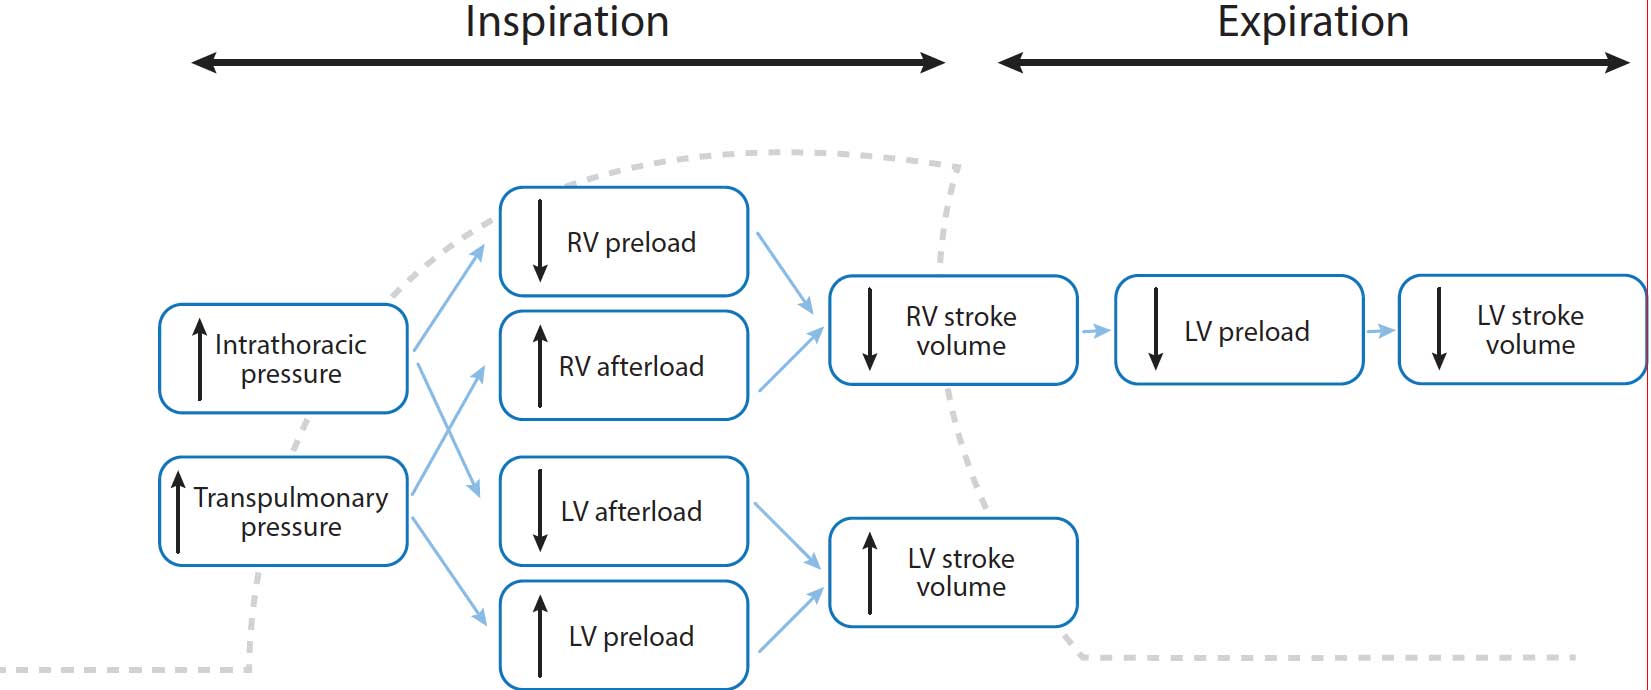 Figure 1. Cardiovascular changes during the respiratory cycle. RV = right ventricular; LV = left ventricular.